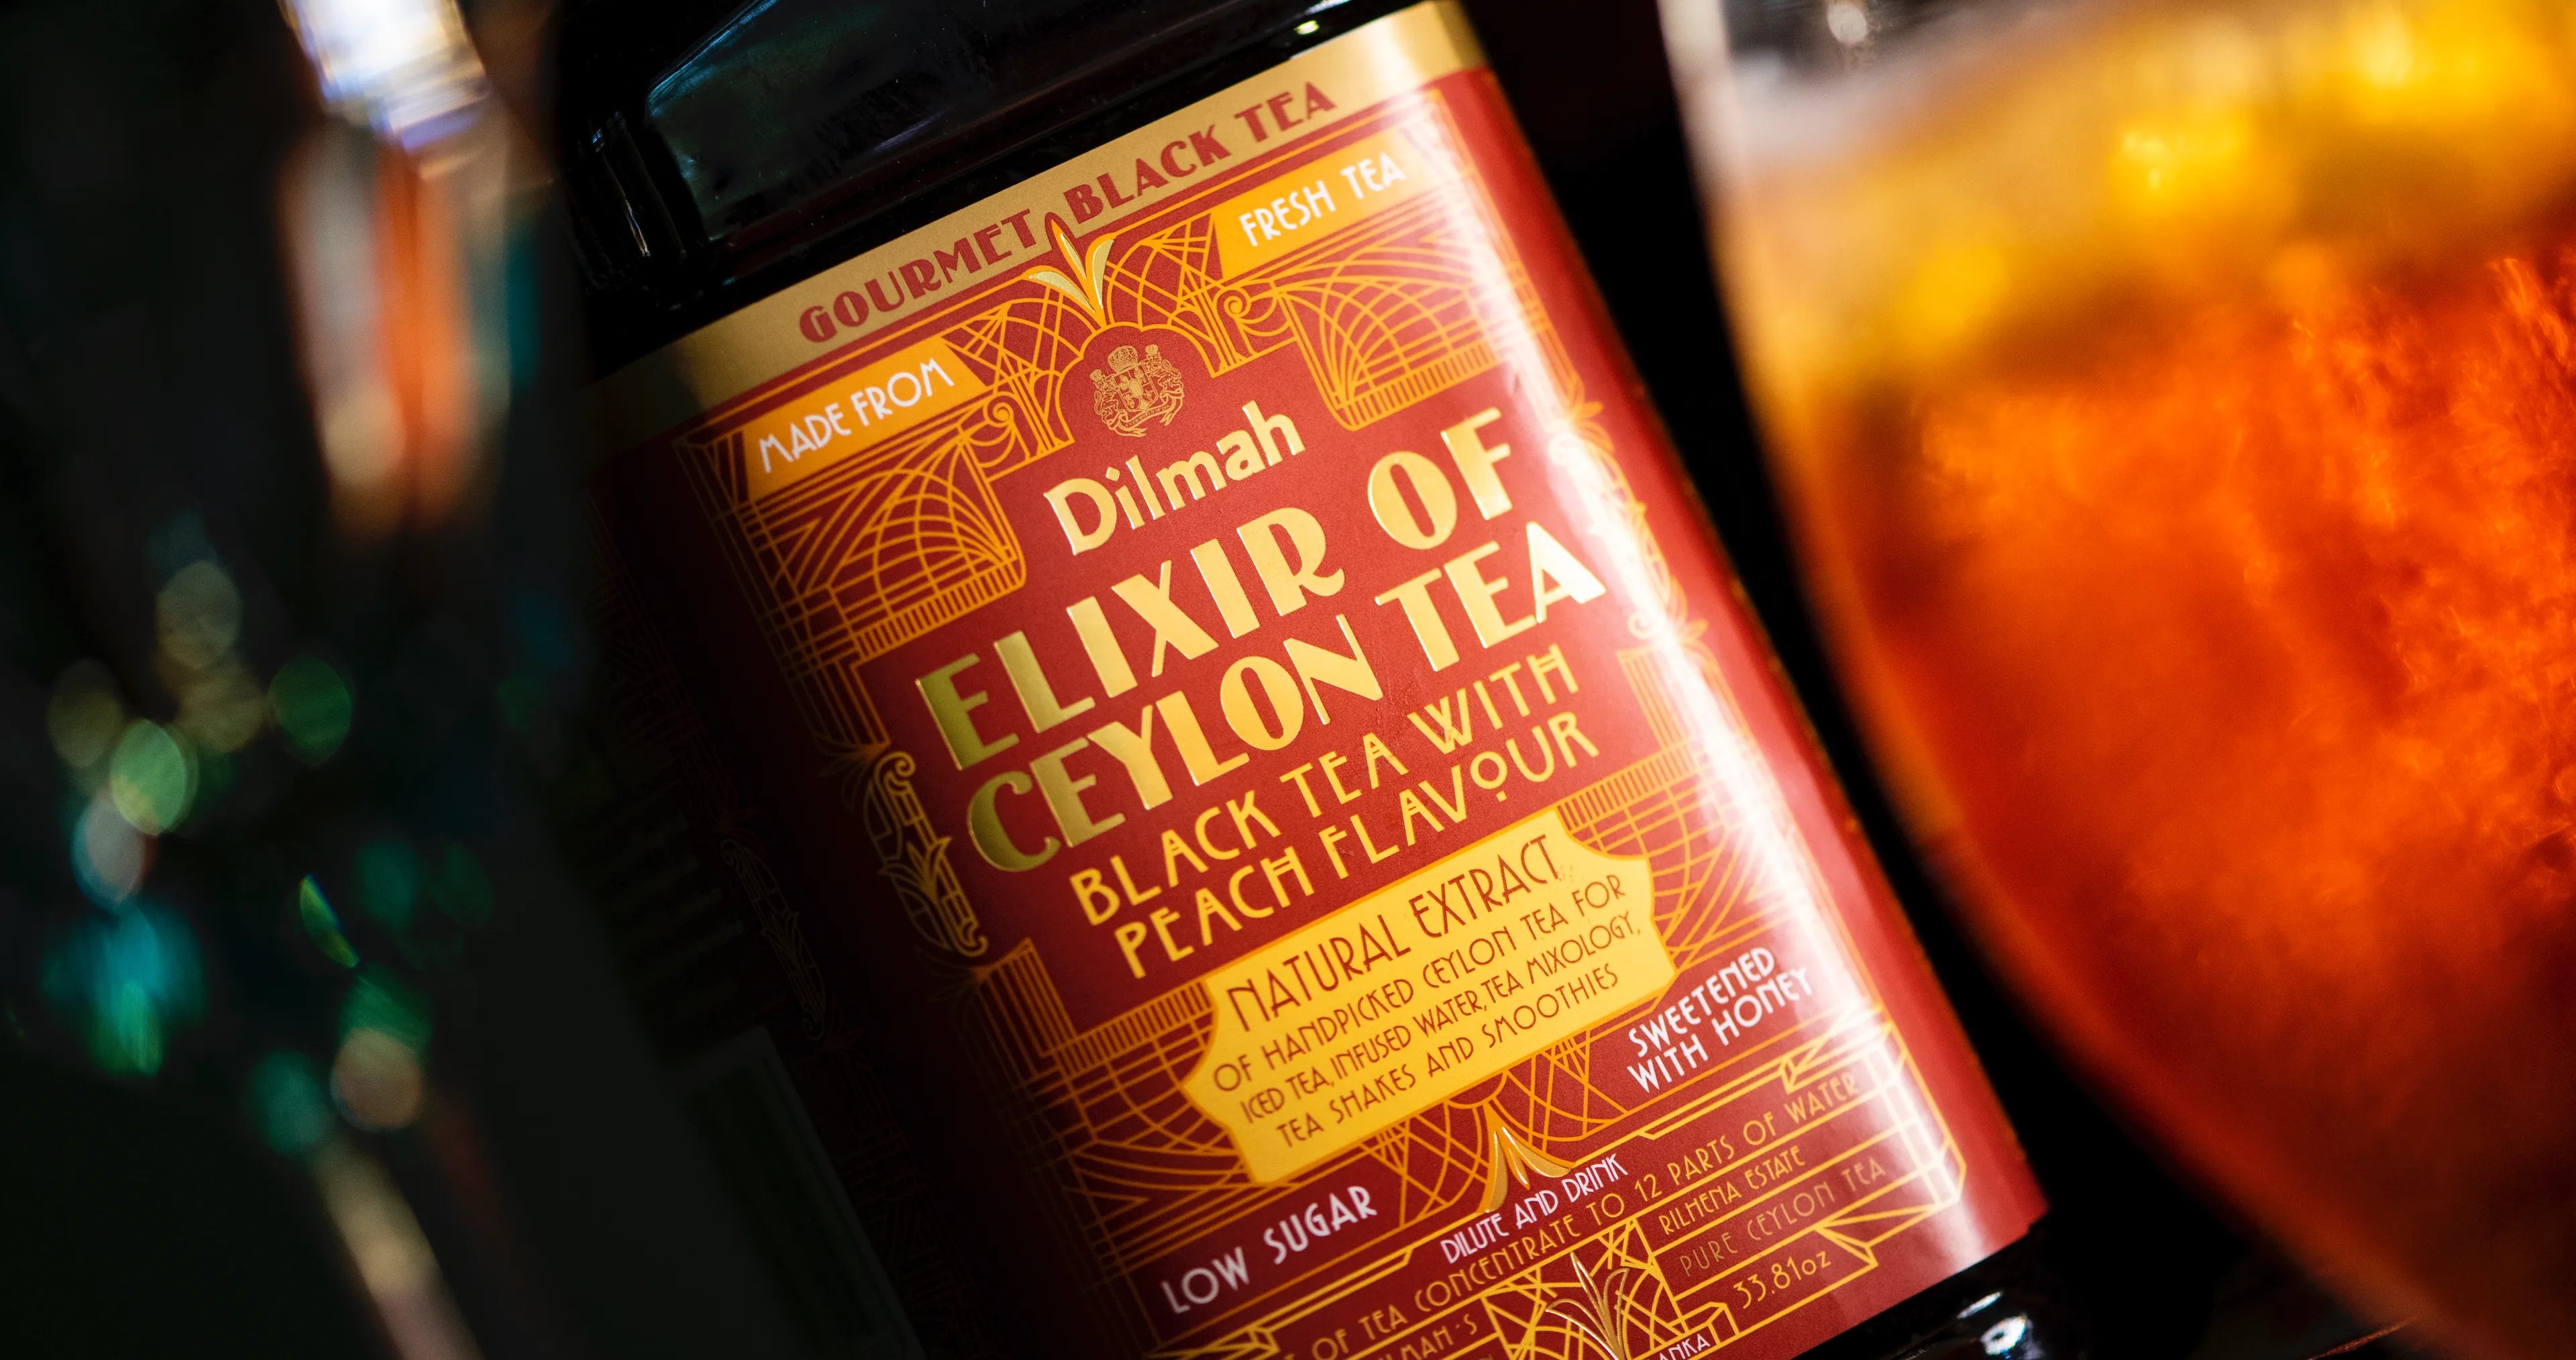 close-up of the label of a bottle of elixir of Ceylon black tea peach